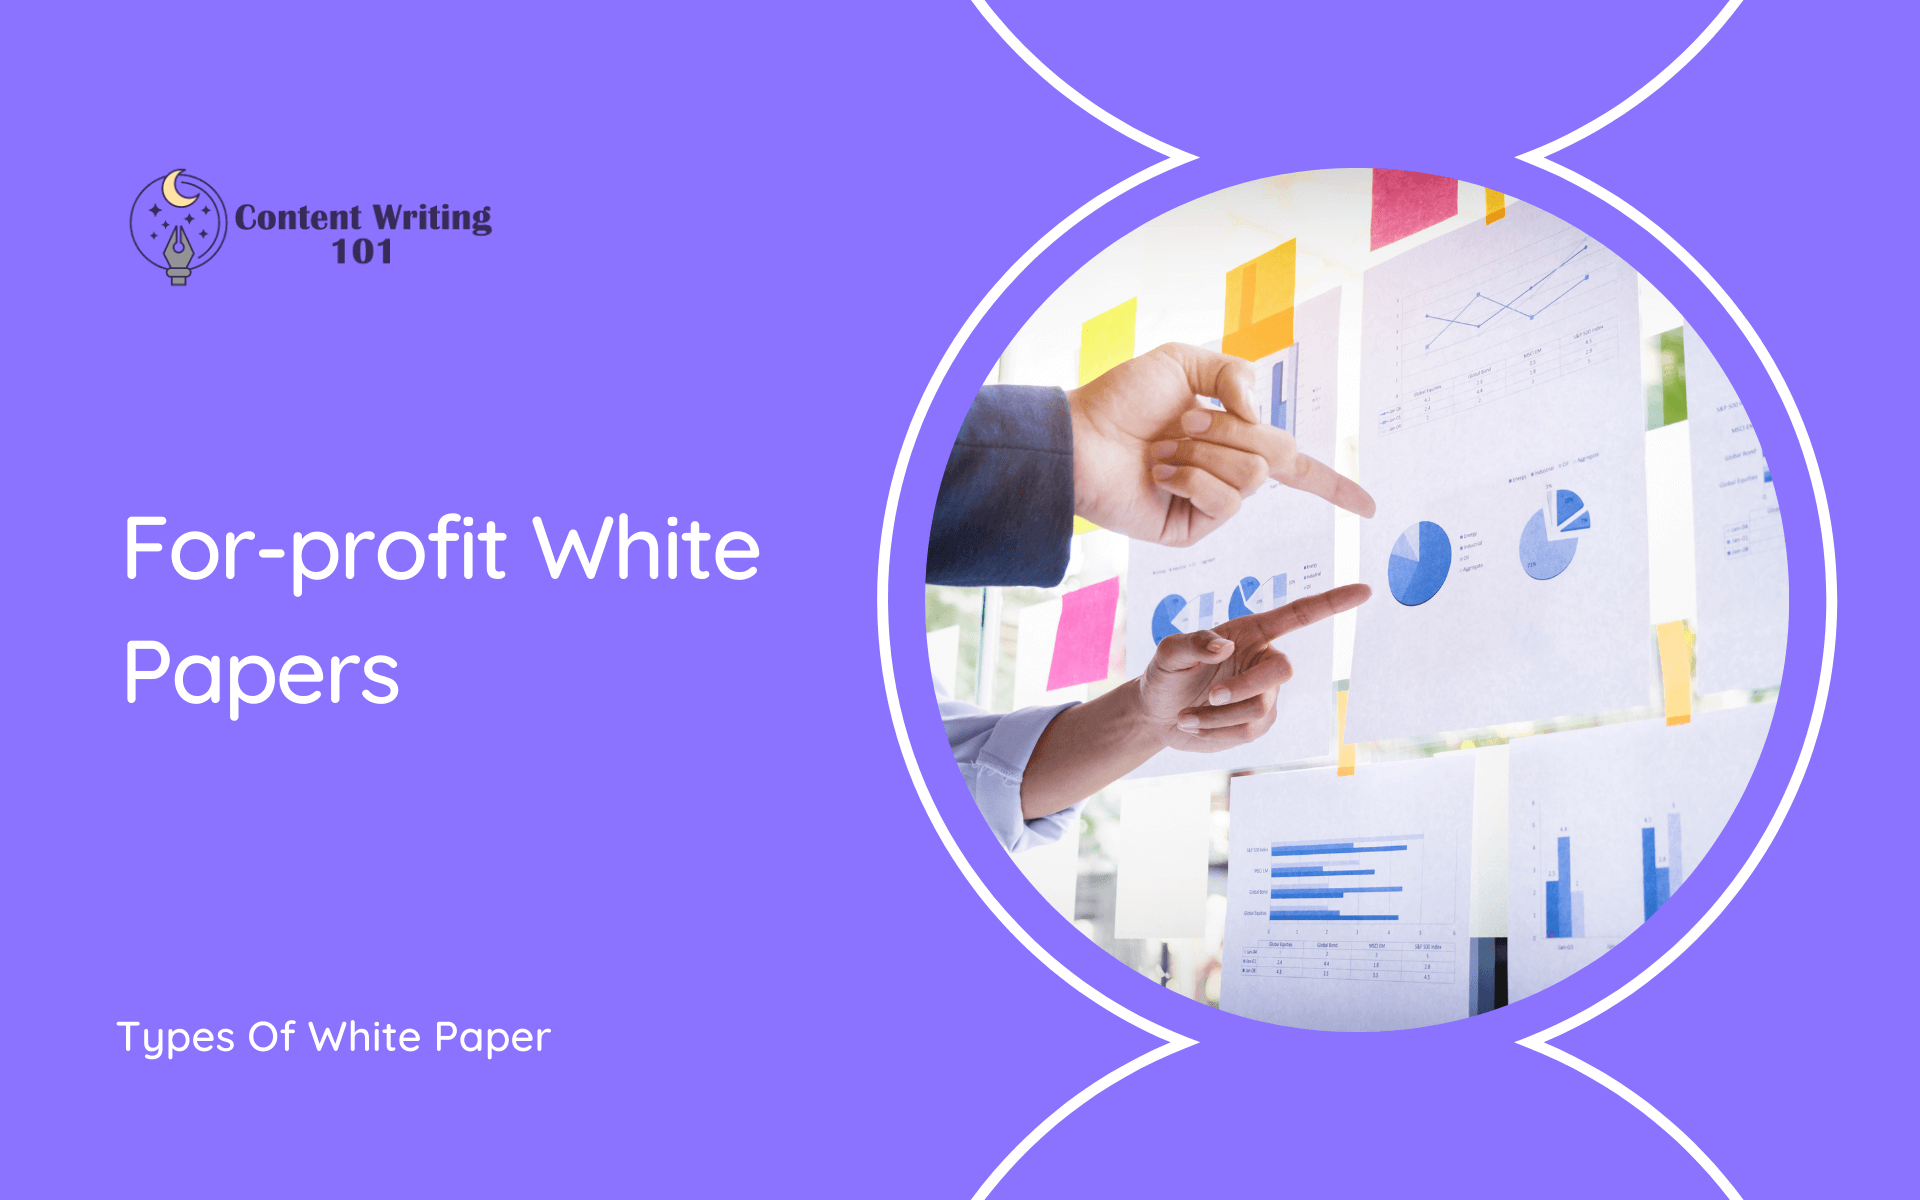 How To Write A White Paper?